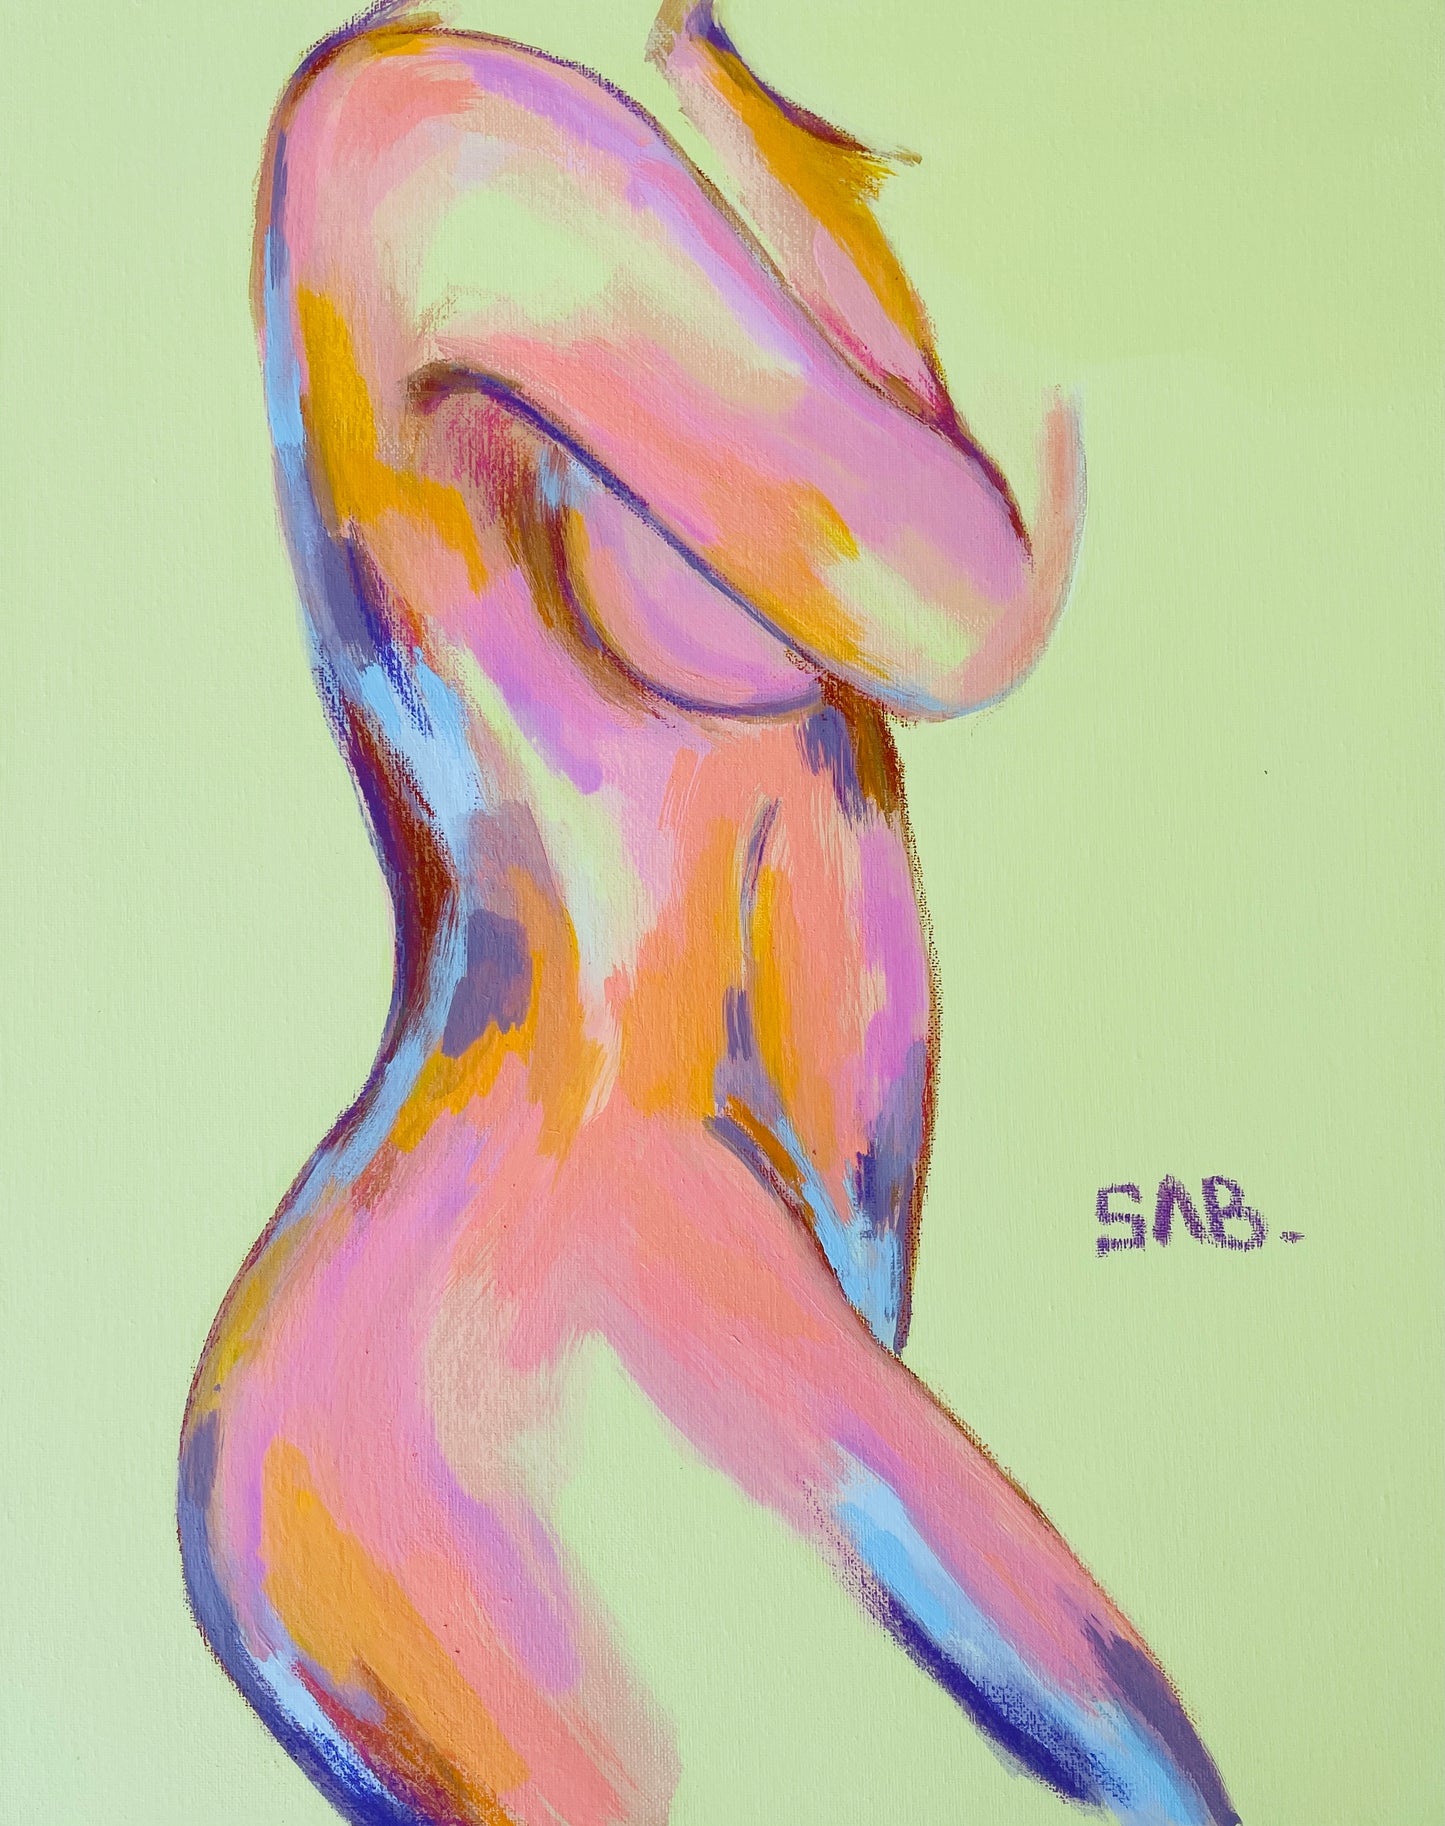 “S” abstract figurative female body painting print